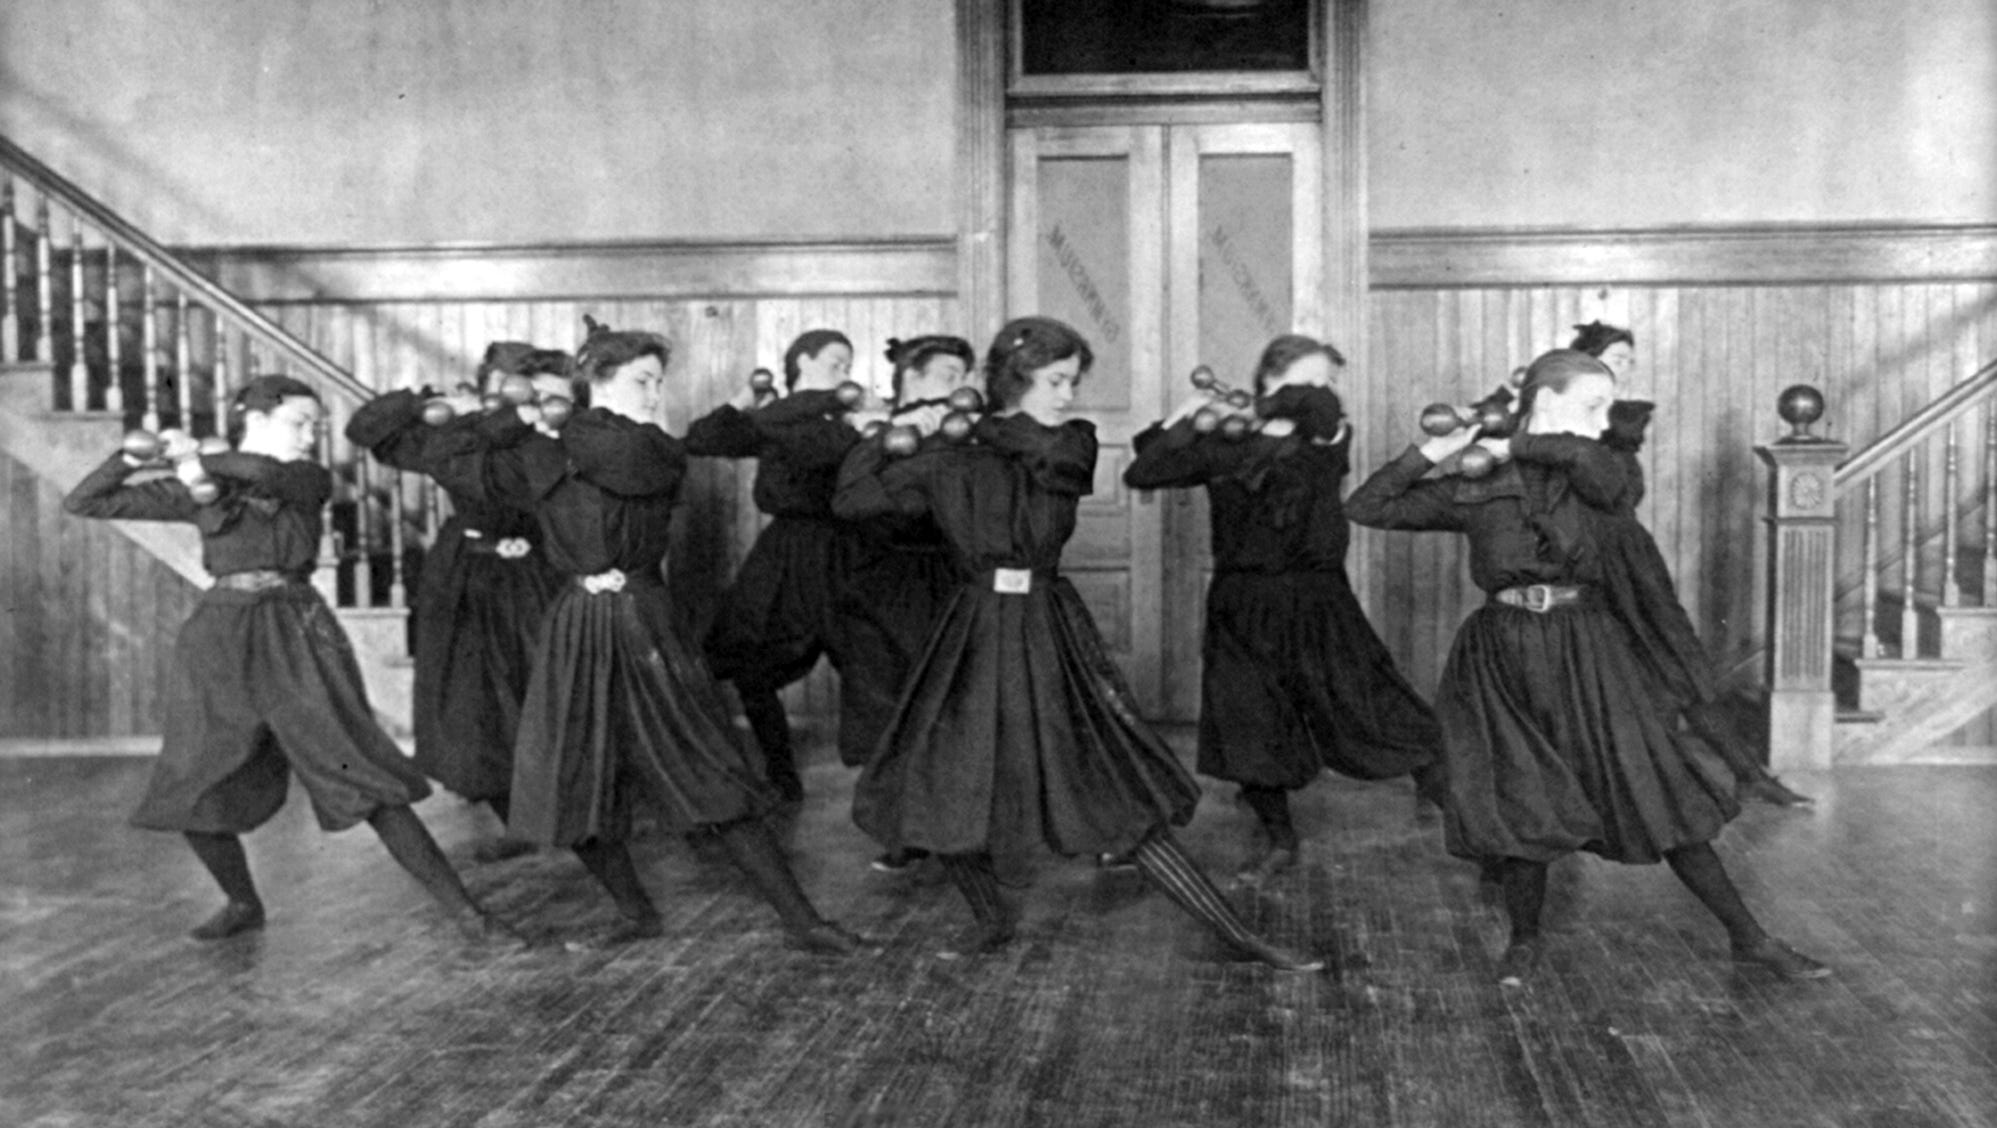 Girls work out with dumbells in a high school gym class in 1899.